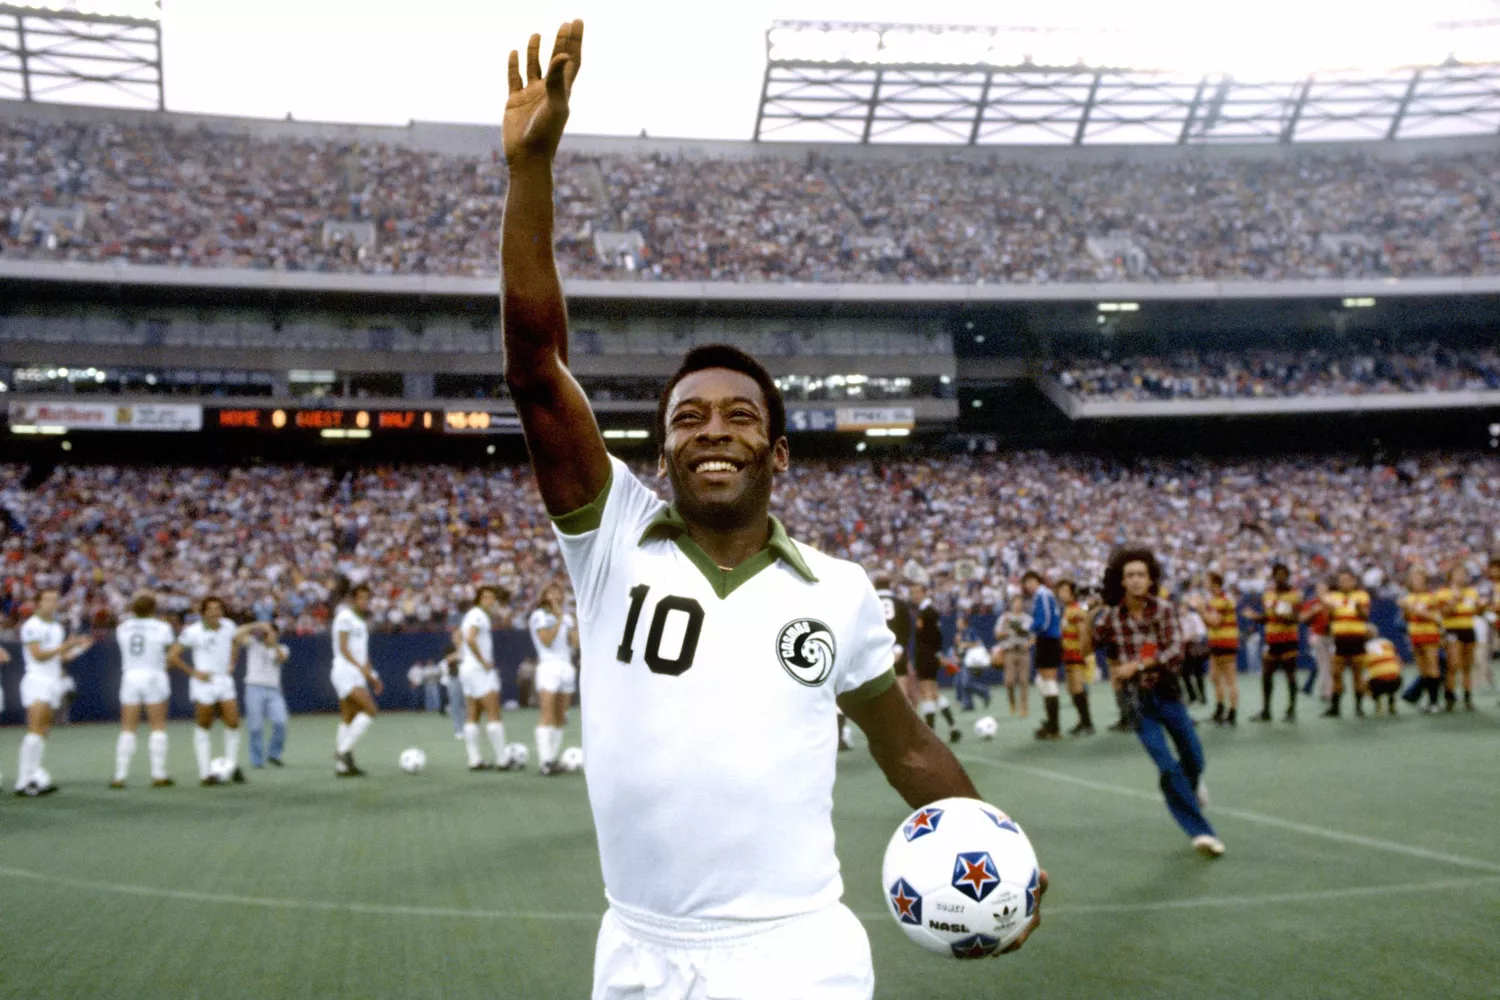 NASL Soccer: NASL Playoffs: New York Cosmos Pele (10) victorious after winning match vs Fort Lauderdale Strikers at Giants Stadium. East Rutherford, NJ 8/14/1977 CREDIT: George Tiedemann (Photo by George Tiedemann /Sports Illustrated via Getty Images)